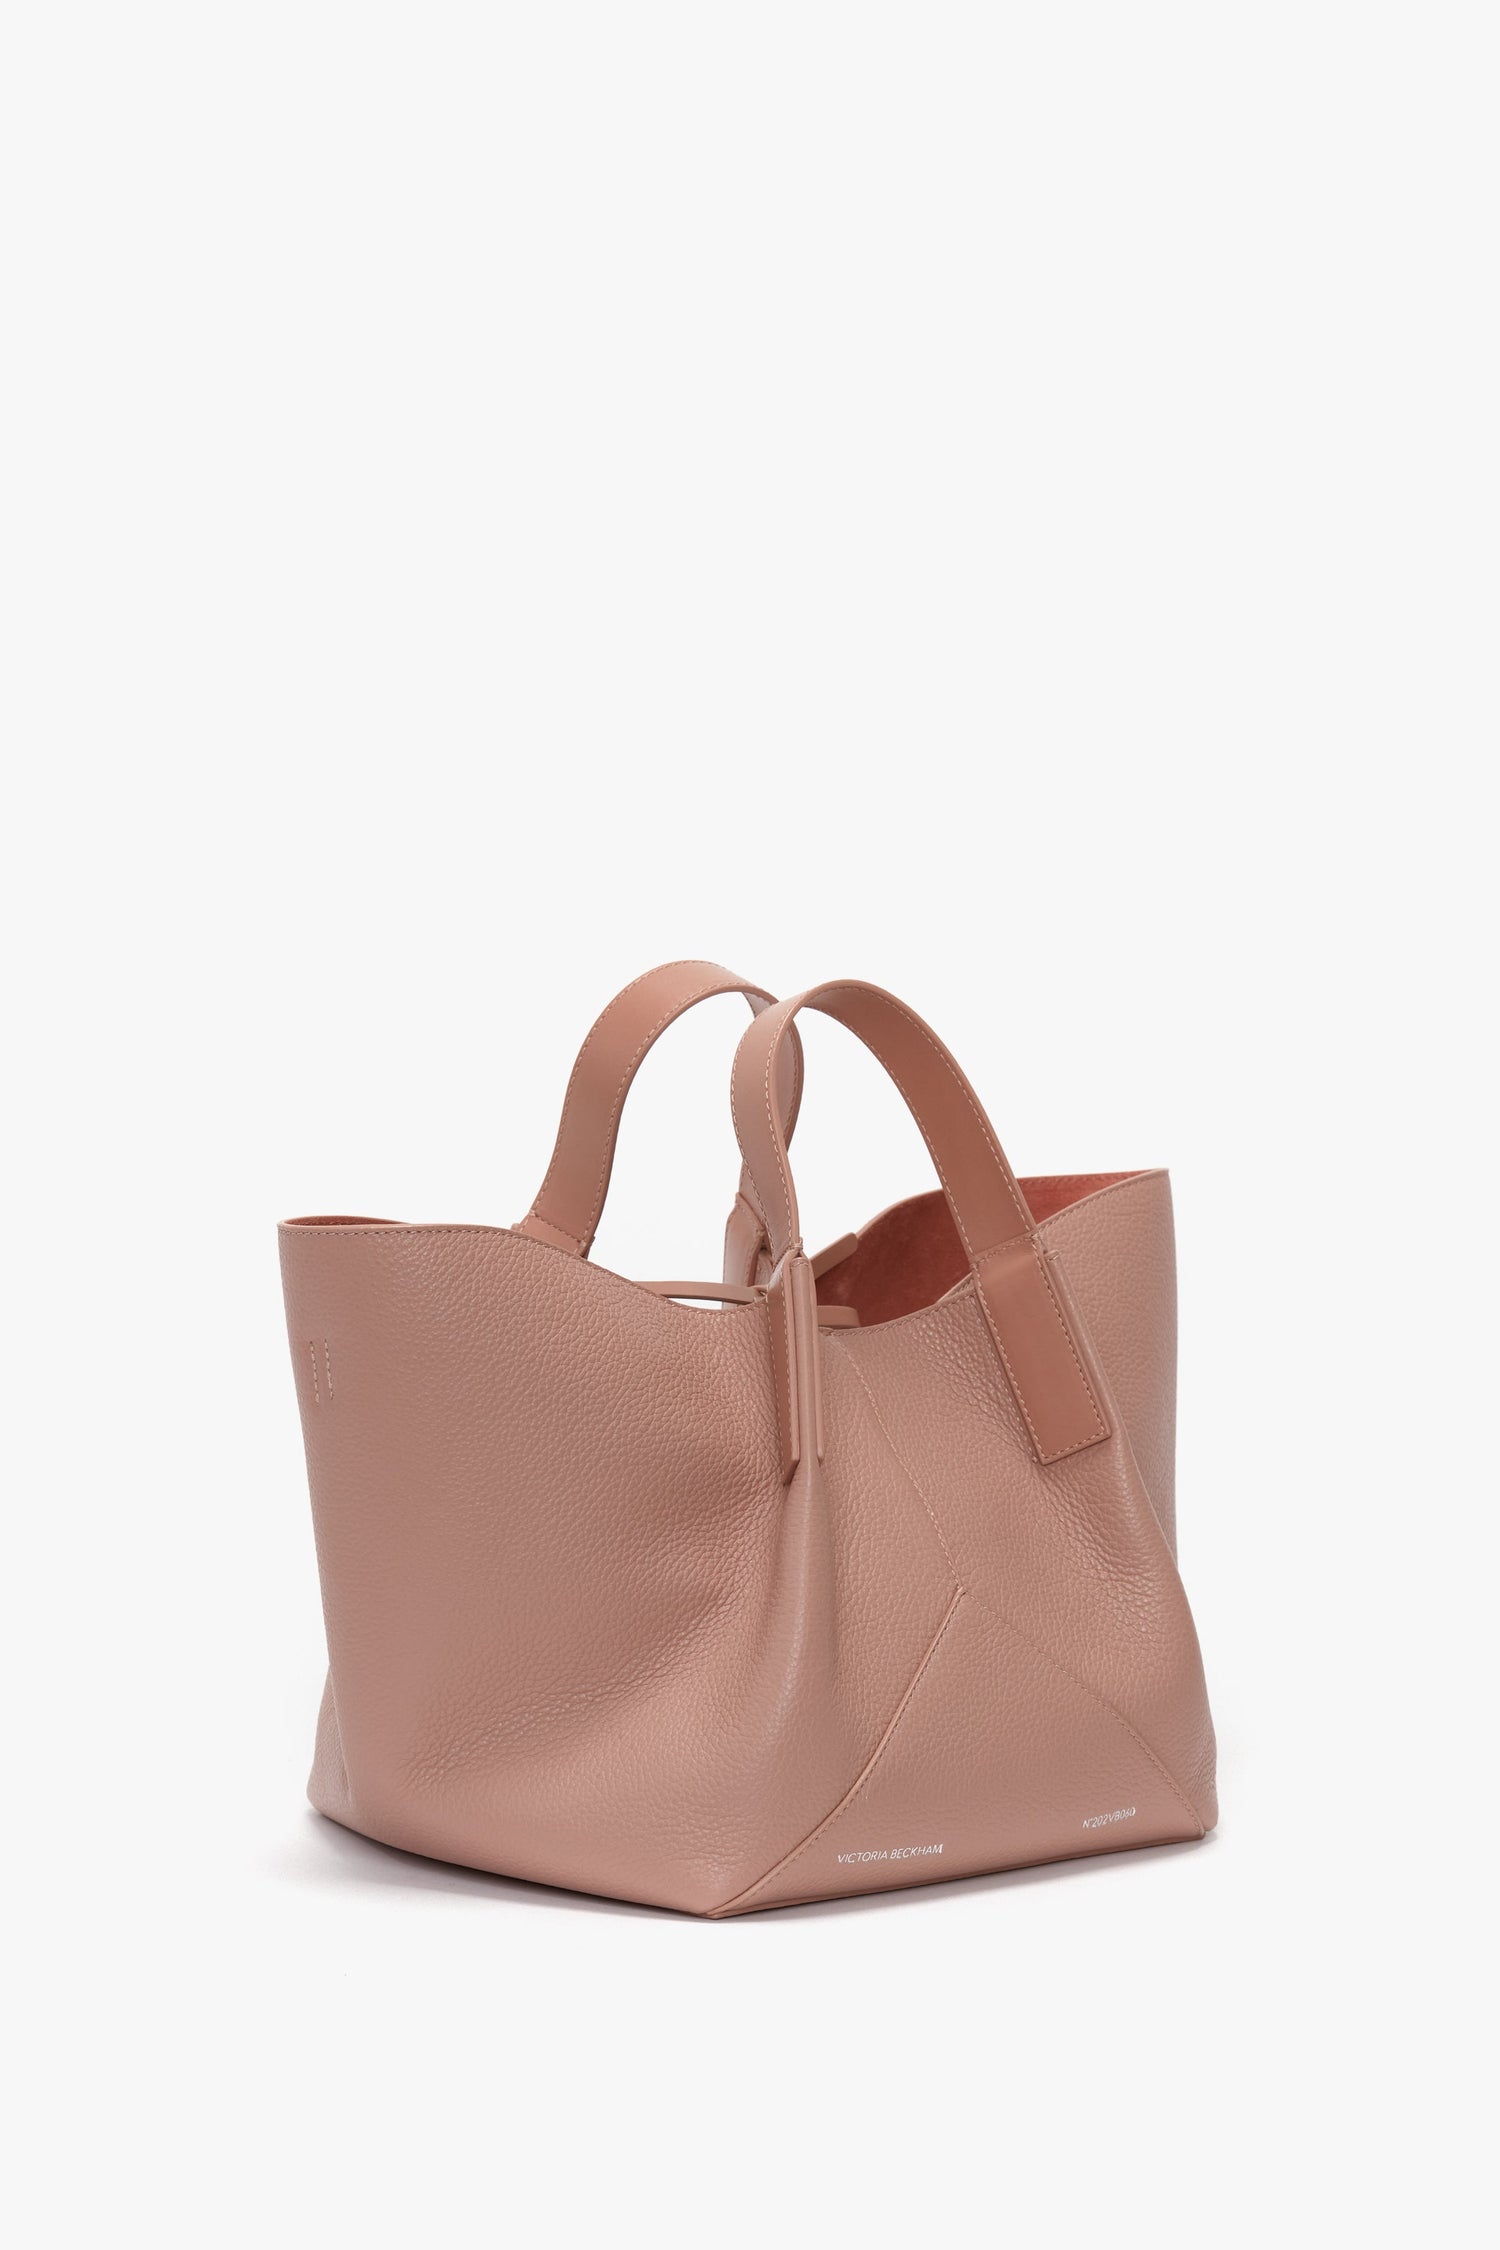 Image of a W11 Mini Tote Bag In Marshmallow Leather by Victoria Beckham in pink calf leather, featuring two handles, a geometric design, and a soft texture. The bag appears to be empty and is displayed against a white background.